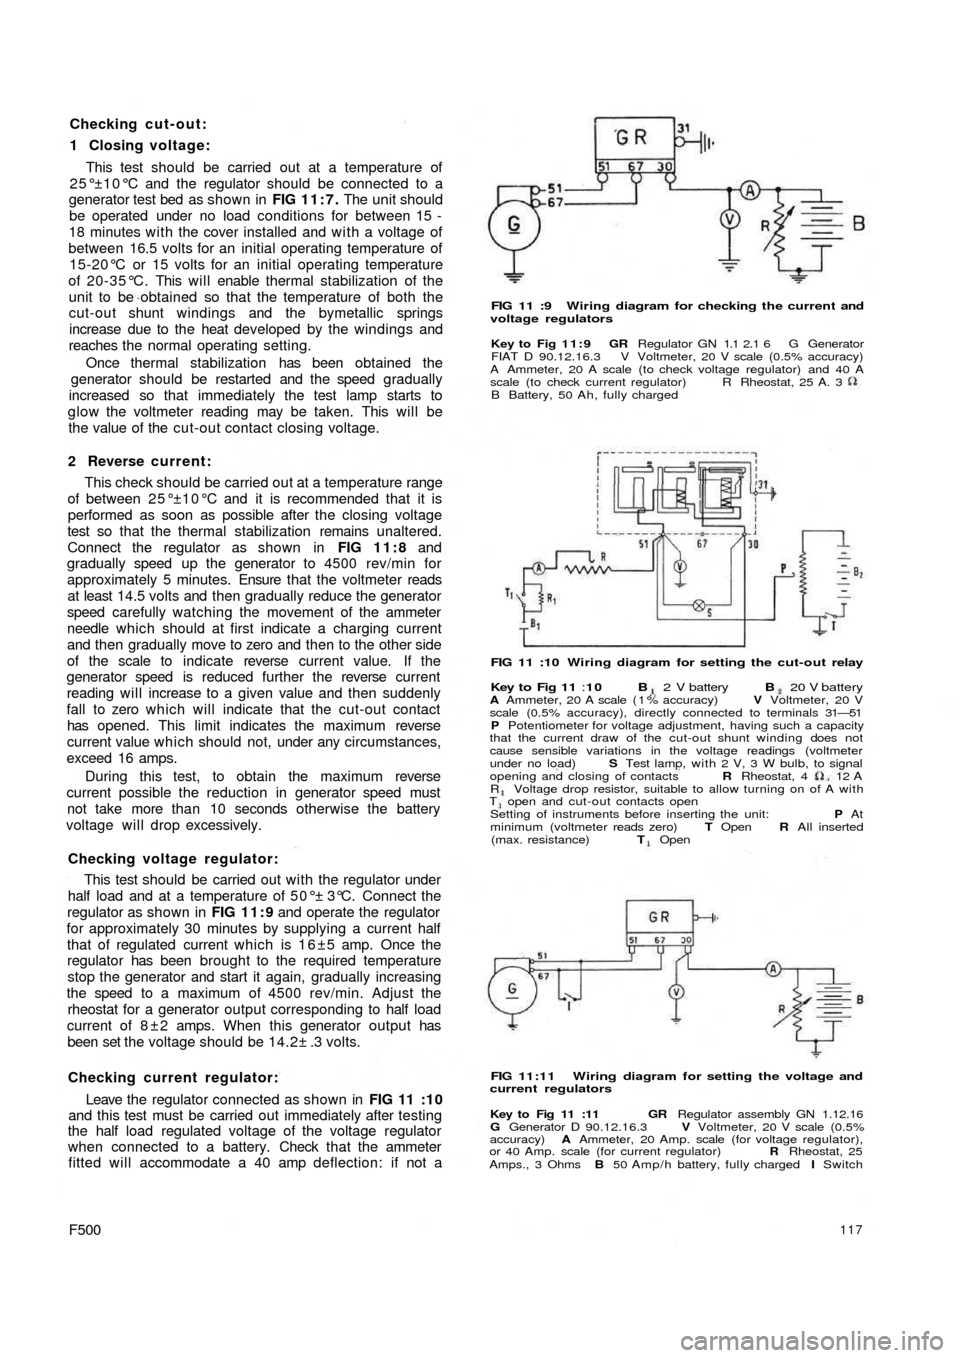 FIAT 500 1971 1.G Workshop Manual Checking cut-out:
1 Closing voltage:
This test should be carried out at a temperature of
25°±10°C and the regulator should be connected to a
generator test bed as shown in FIG 11:7. The unit should